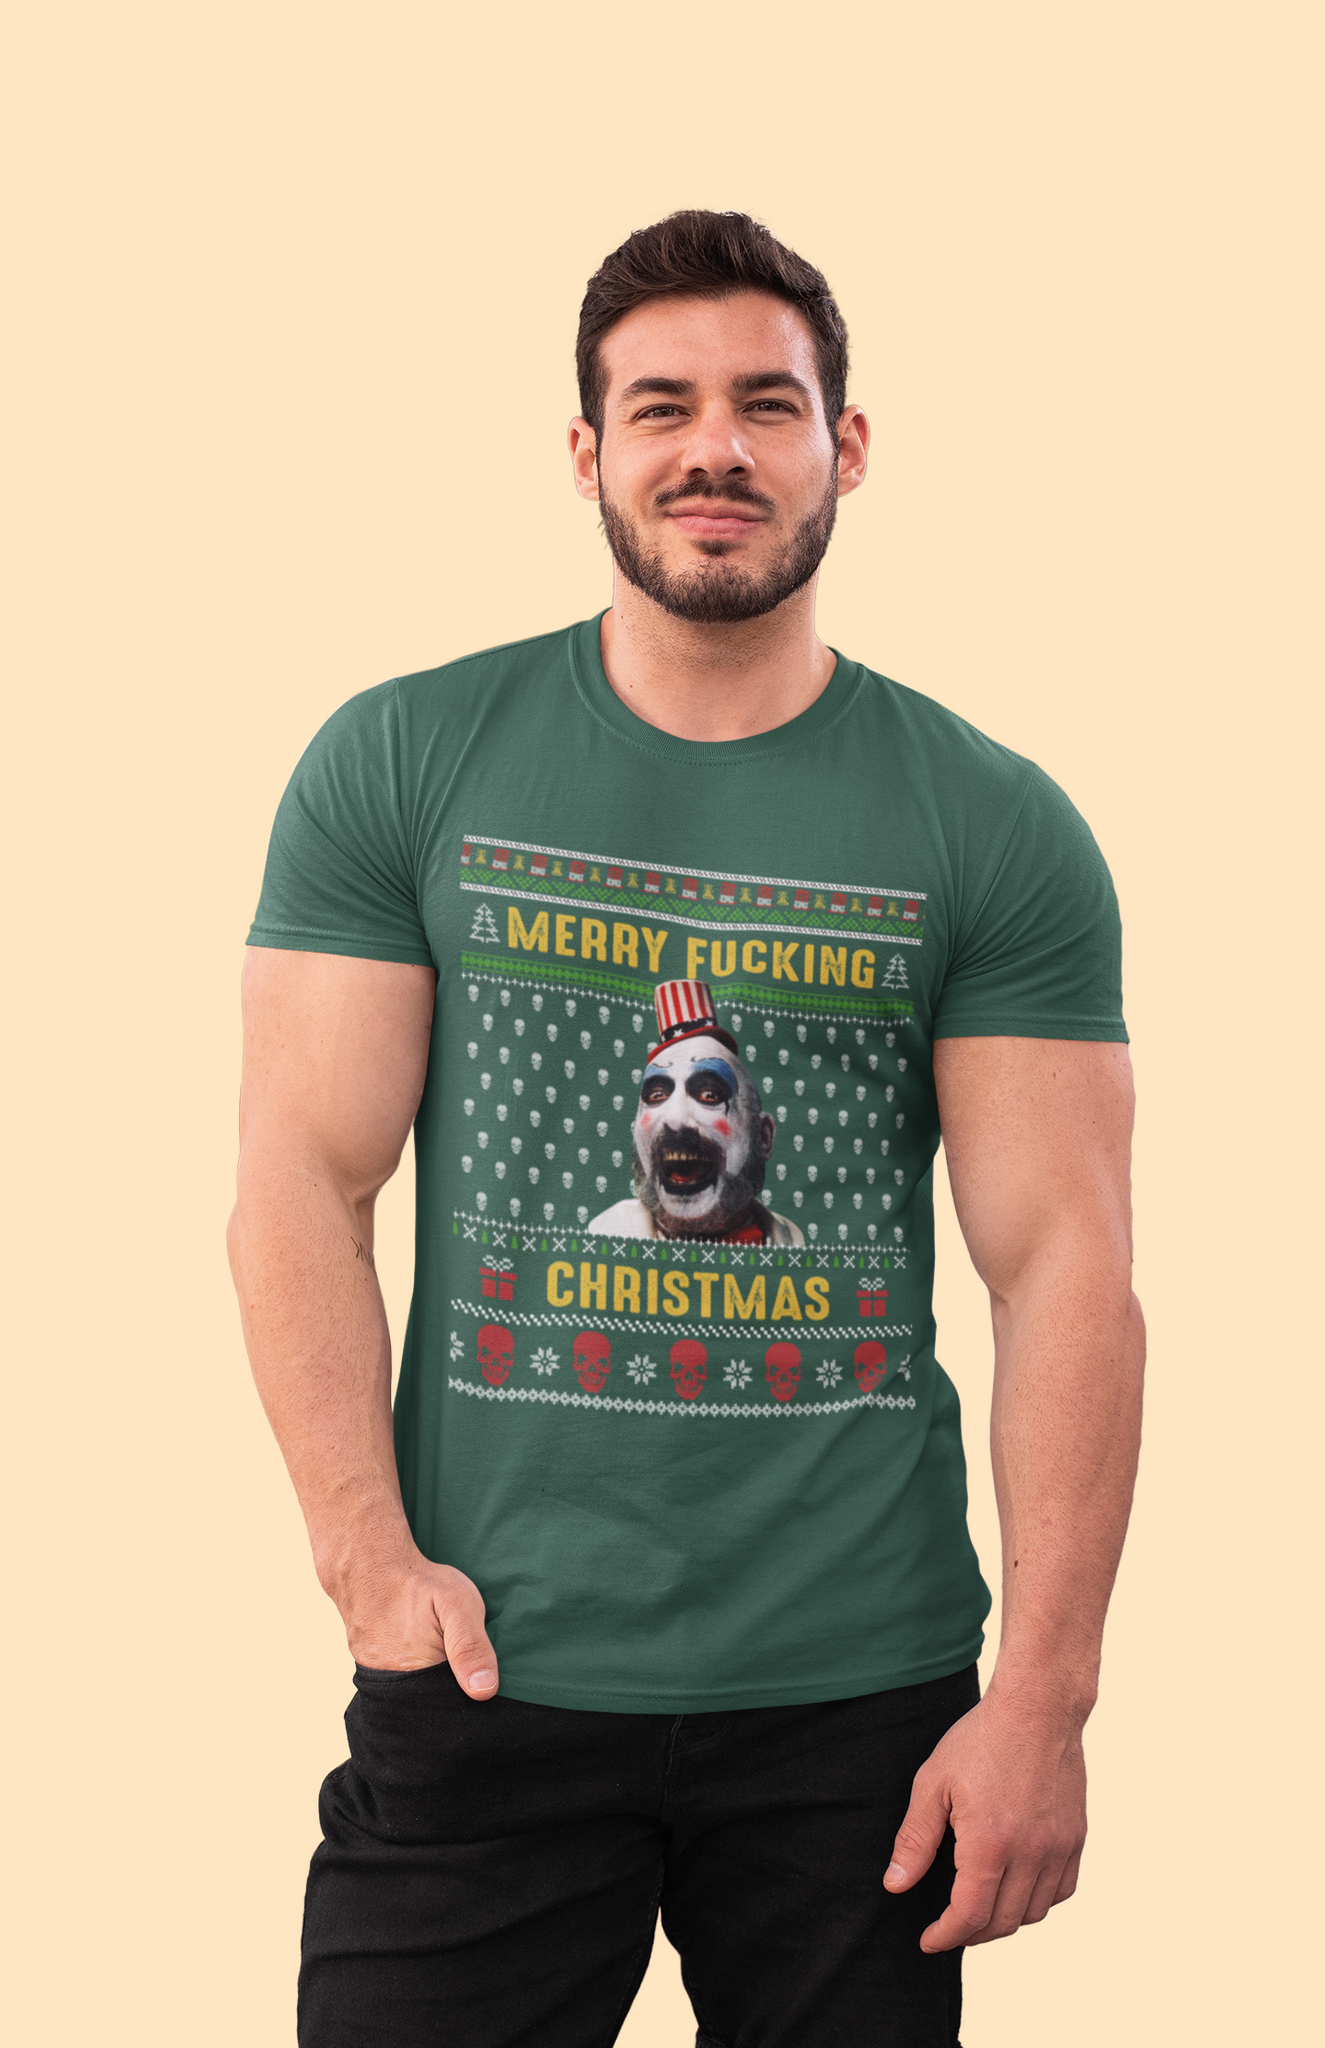 House Of 1000 Corpses Ugly Sweater T Shirt, Captain Spaulding Tshirt, Merry Fucking Christmas Shirt, Halloween Gifts, Christmas Gifts